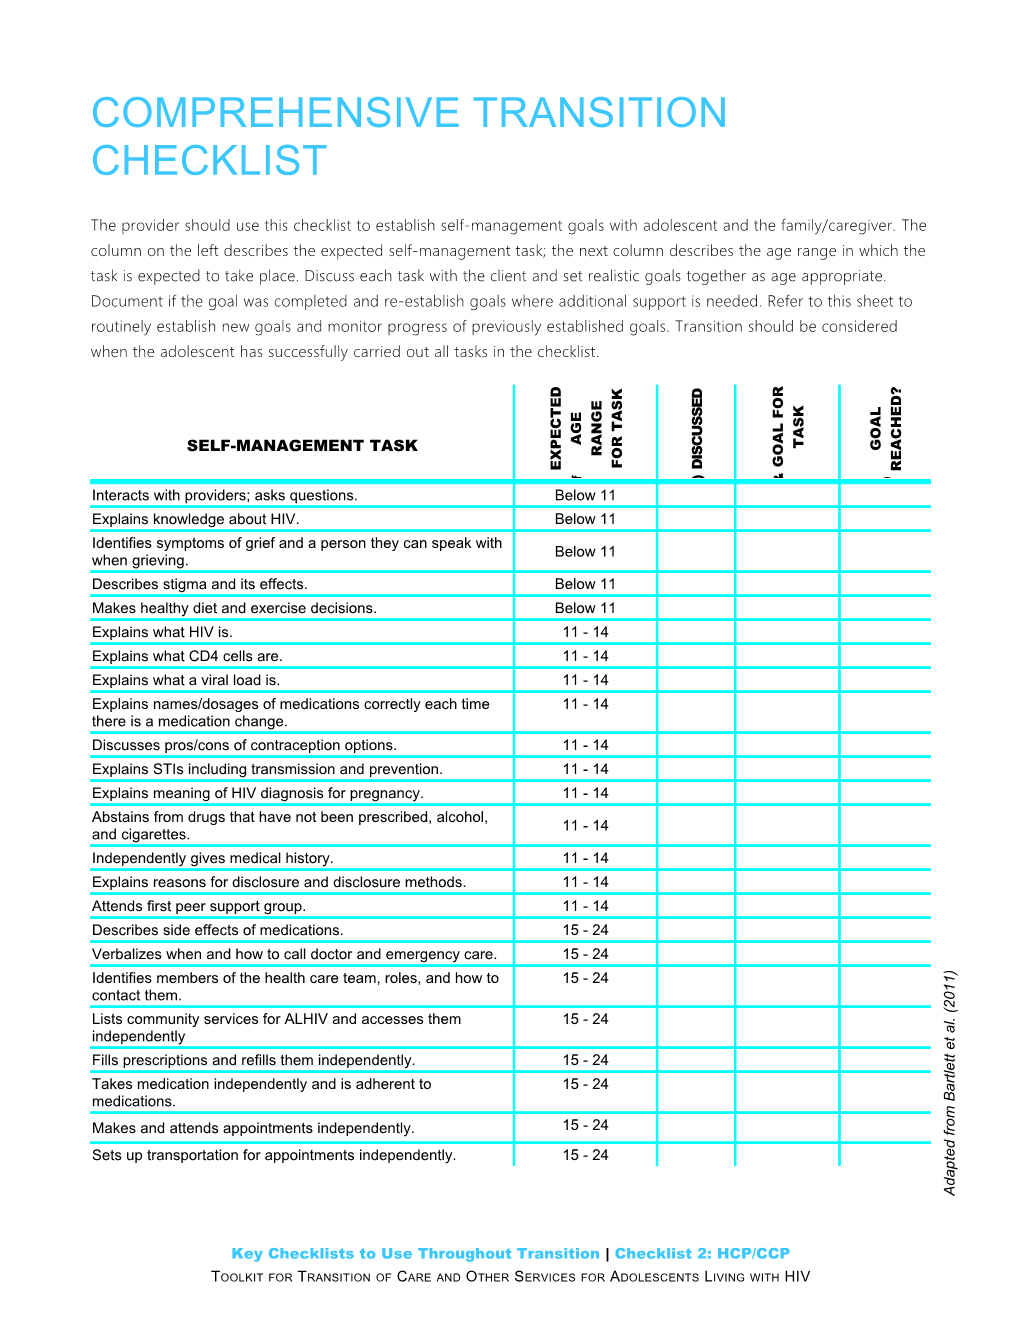 Key Checklists to Use Throughout Transition Checklist 2: HCP/CCP